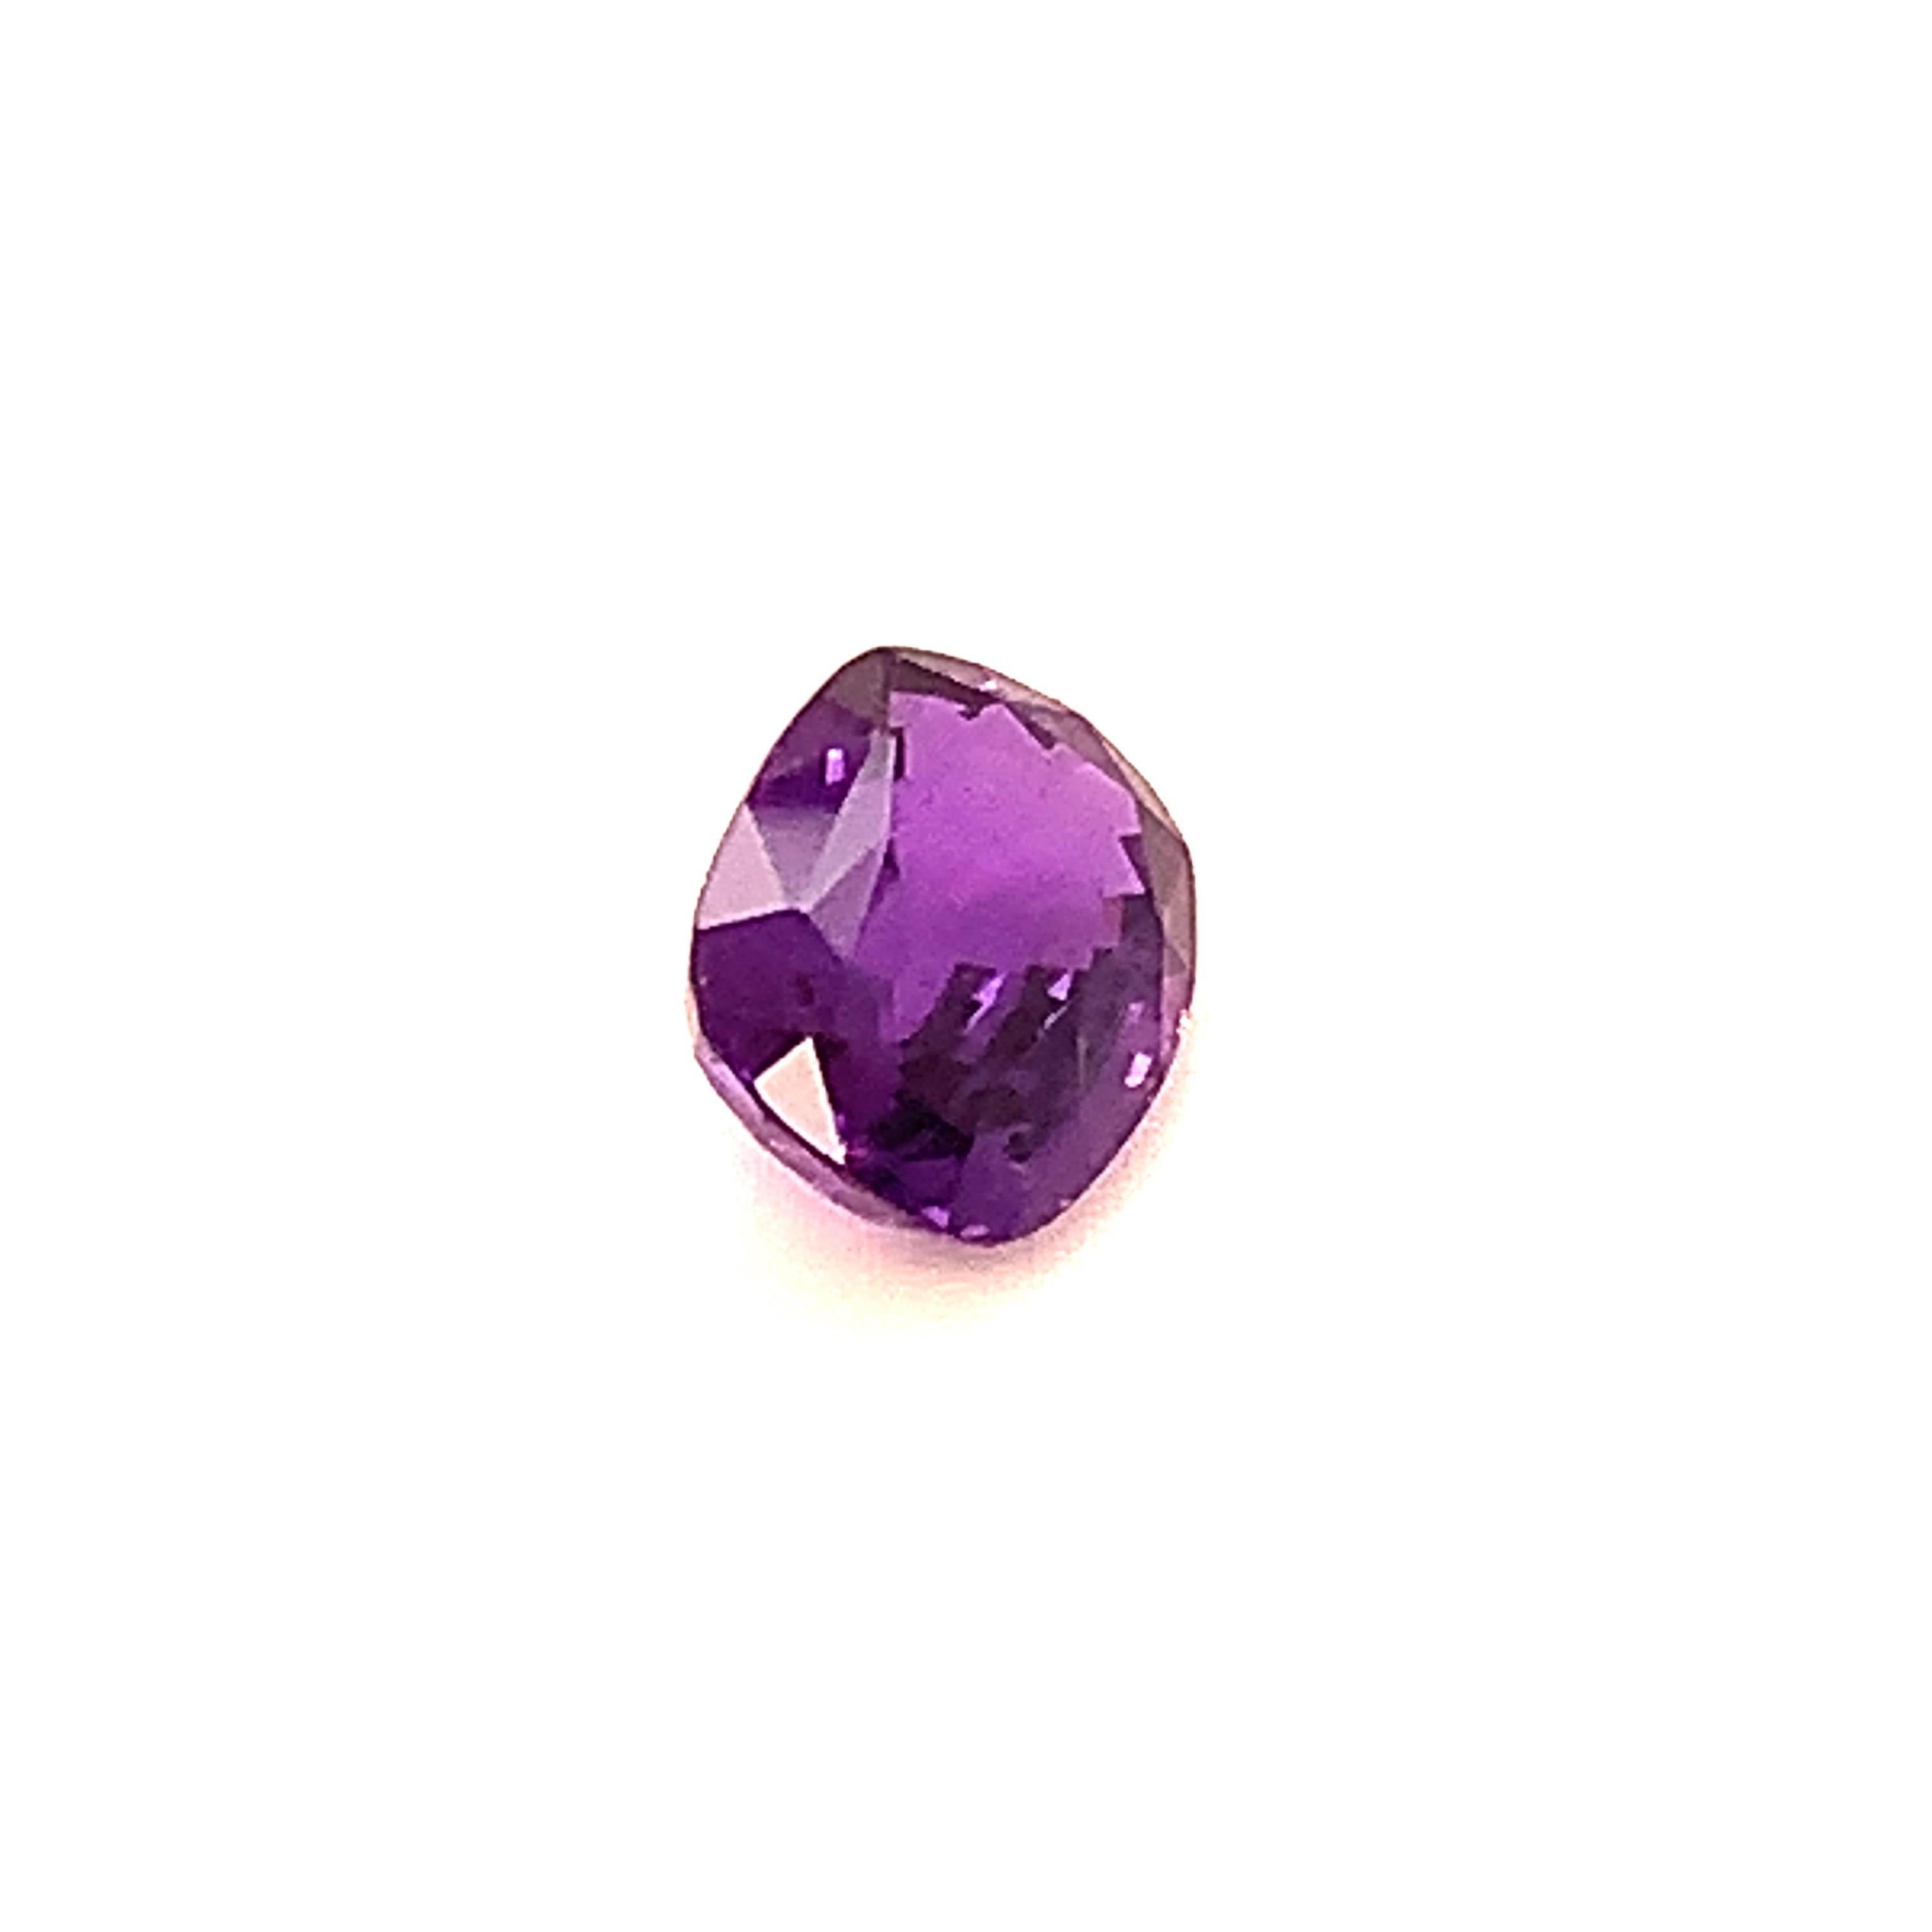 Unheated 3.50 Carat Color Change Sapphire, Unset Loose Gemstone, GIA Certified 1